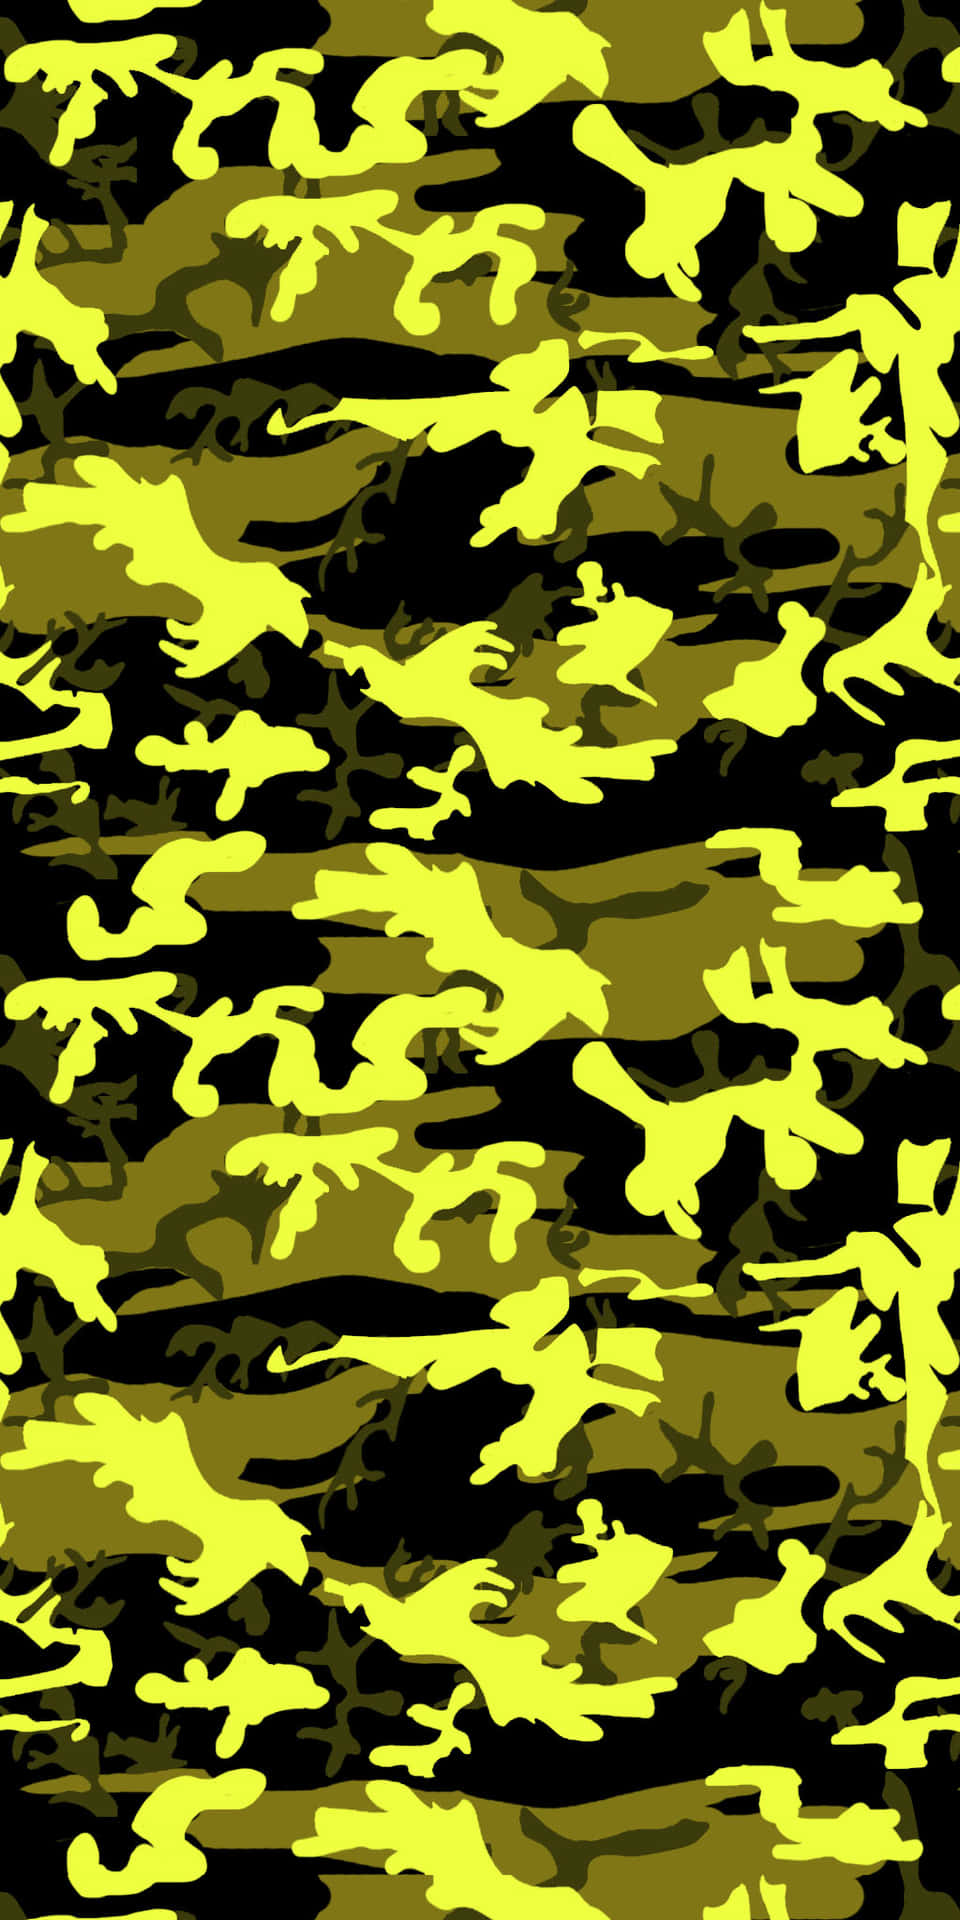 Outdoor Ready: All-Weather Green Camouflage Gear Wallpaper